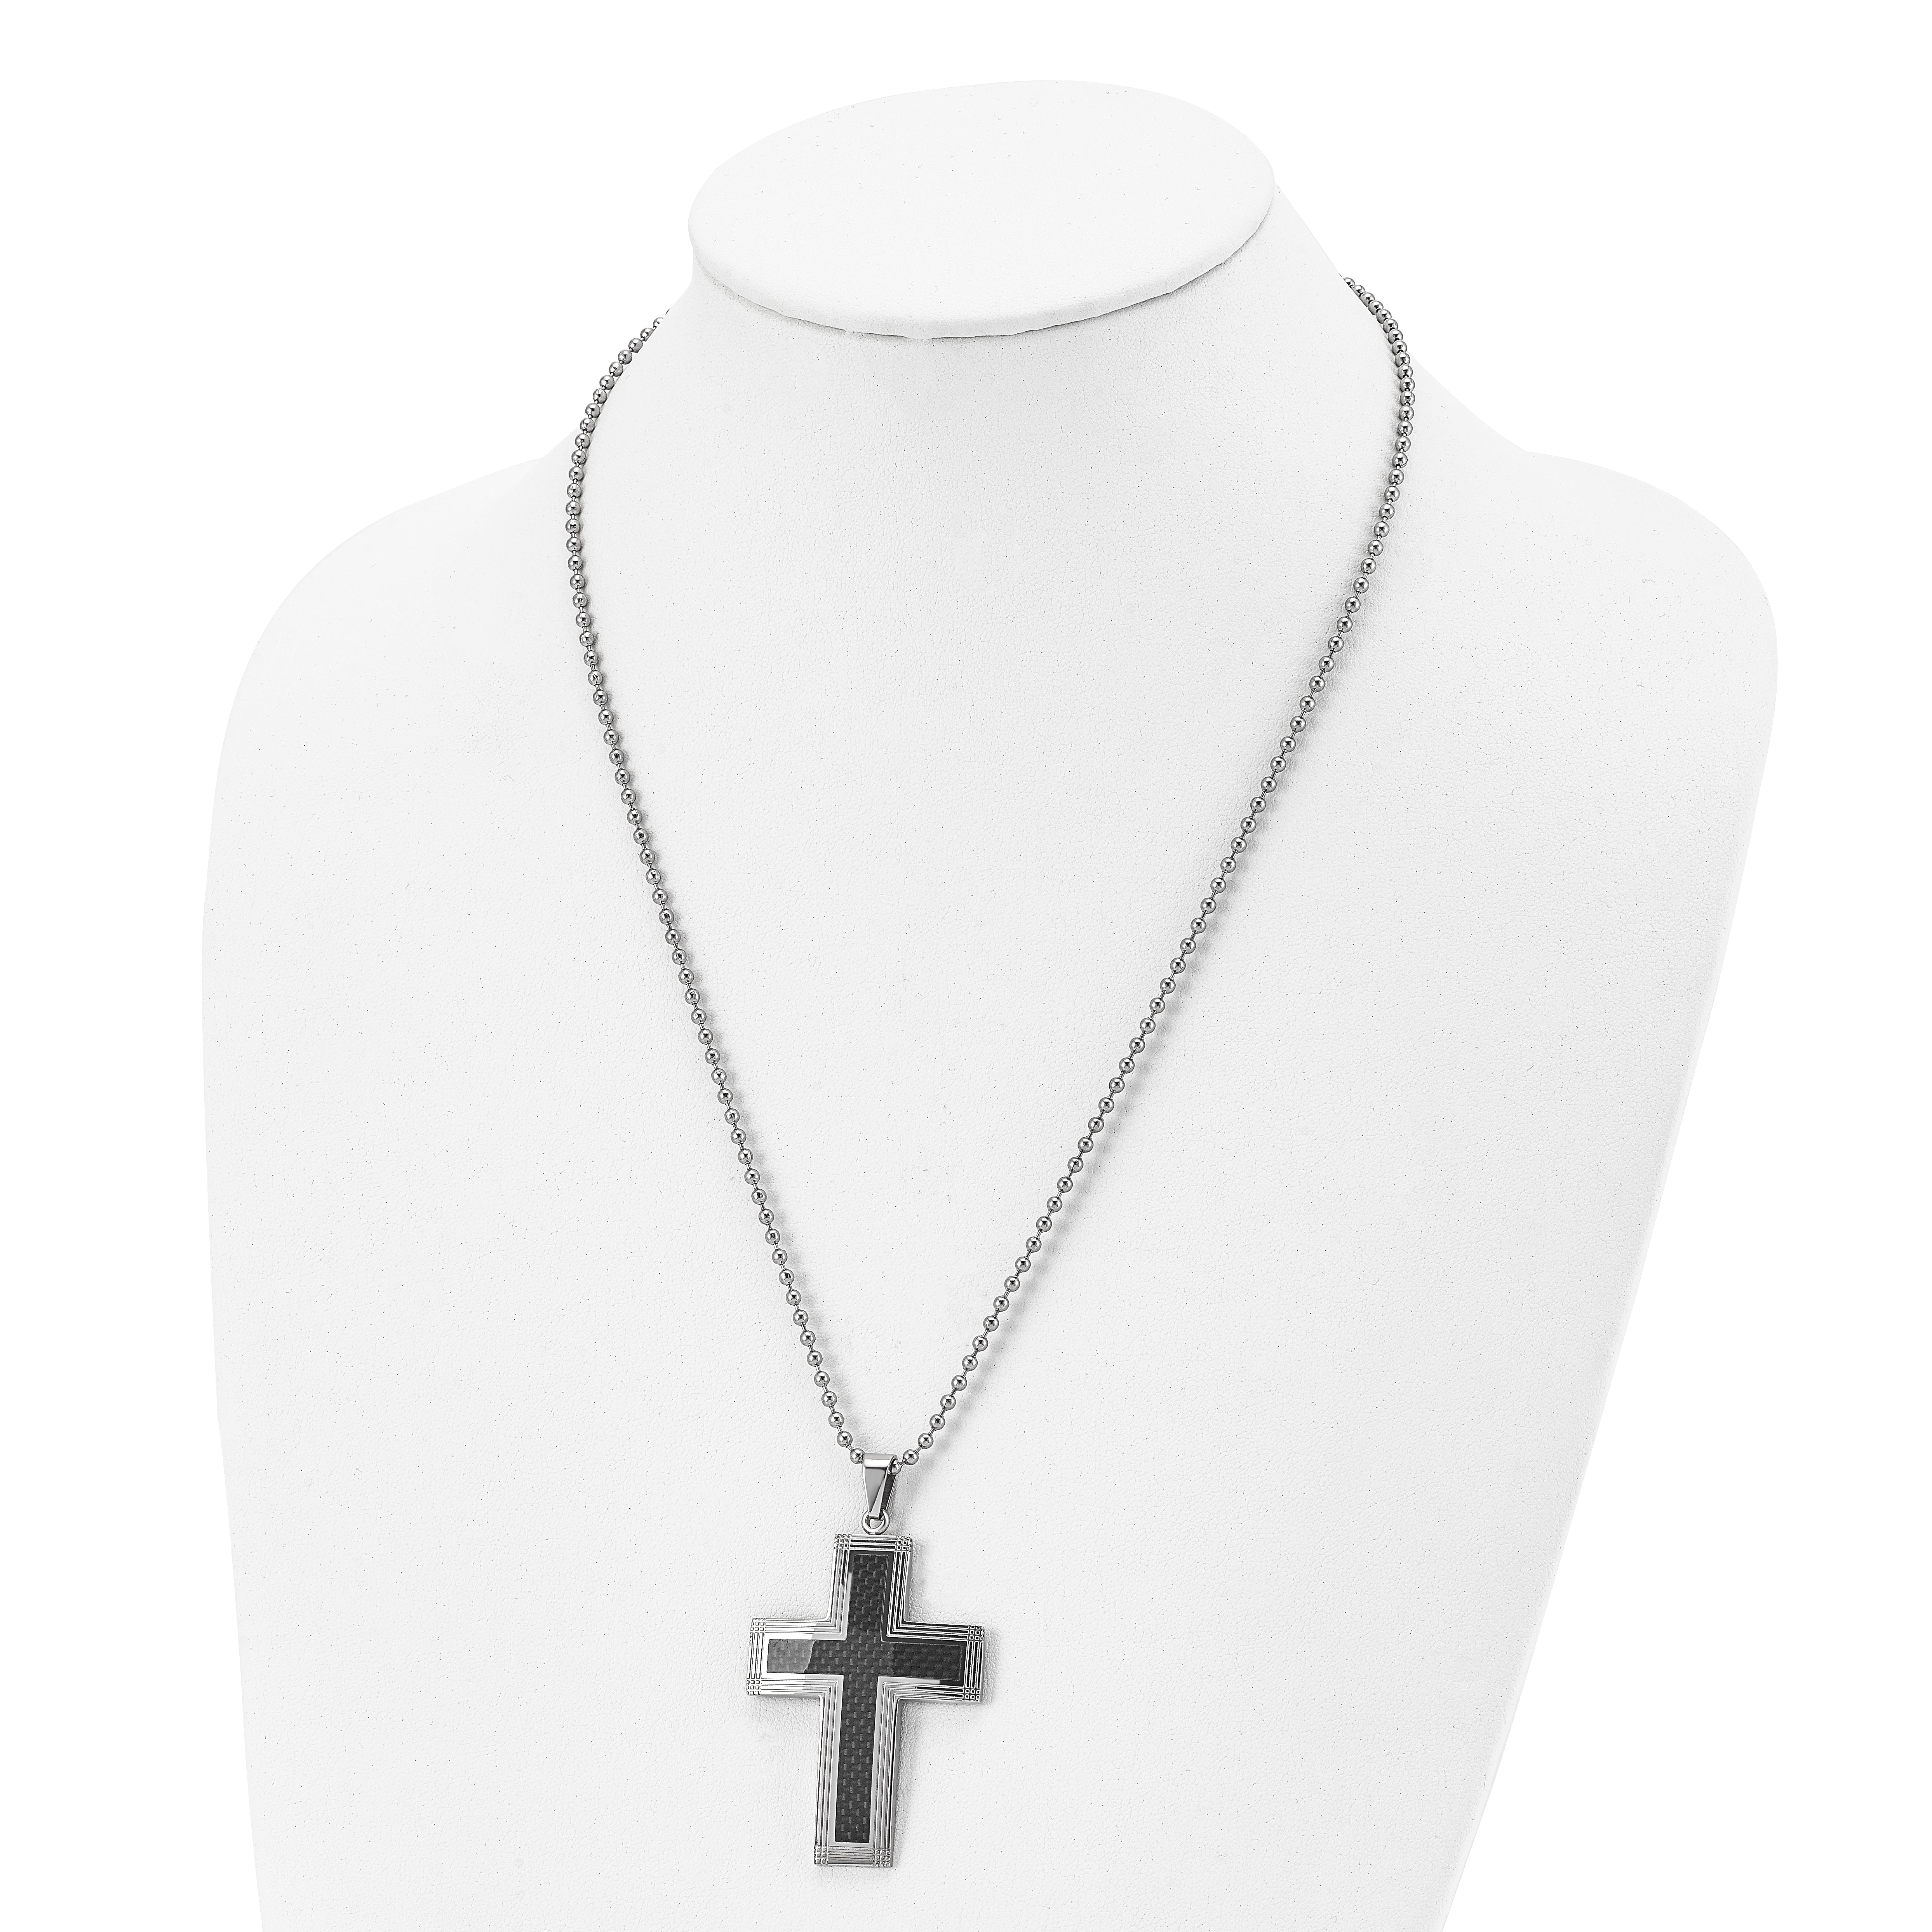 Chisel Stainless Steel Polished with Black Carbon Fiber Inlay Cross Pendant on a 22 inch Ball Chain Necklace